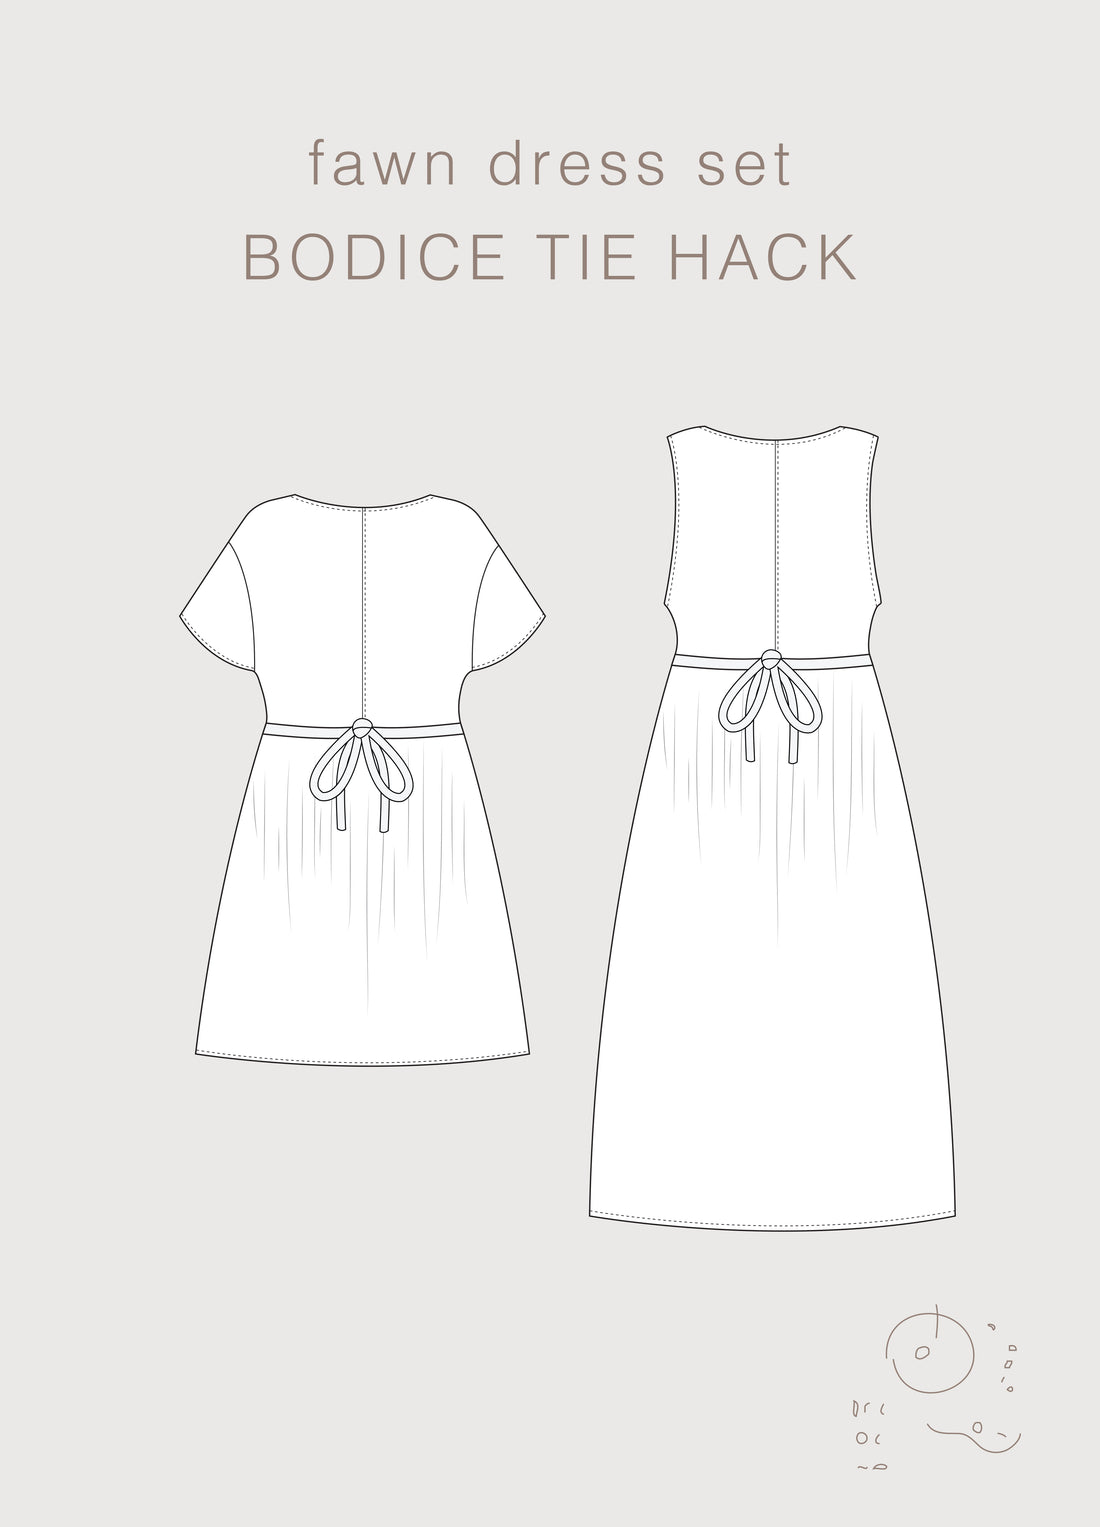 Bodice Tie Hack for the Fawn Dress